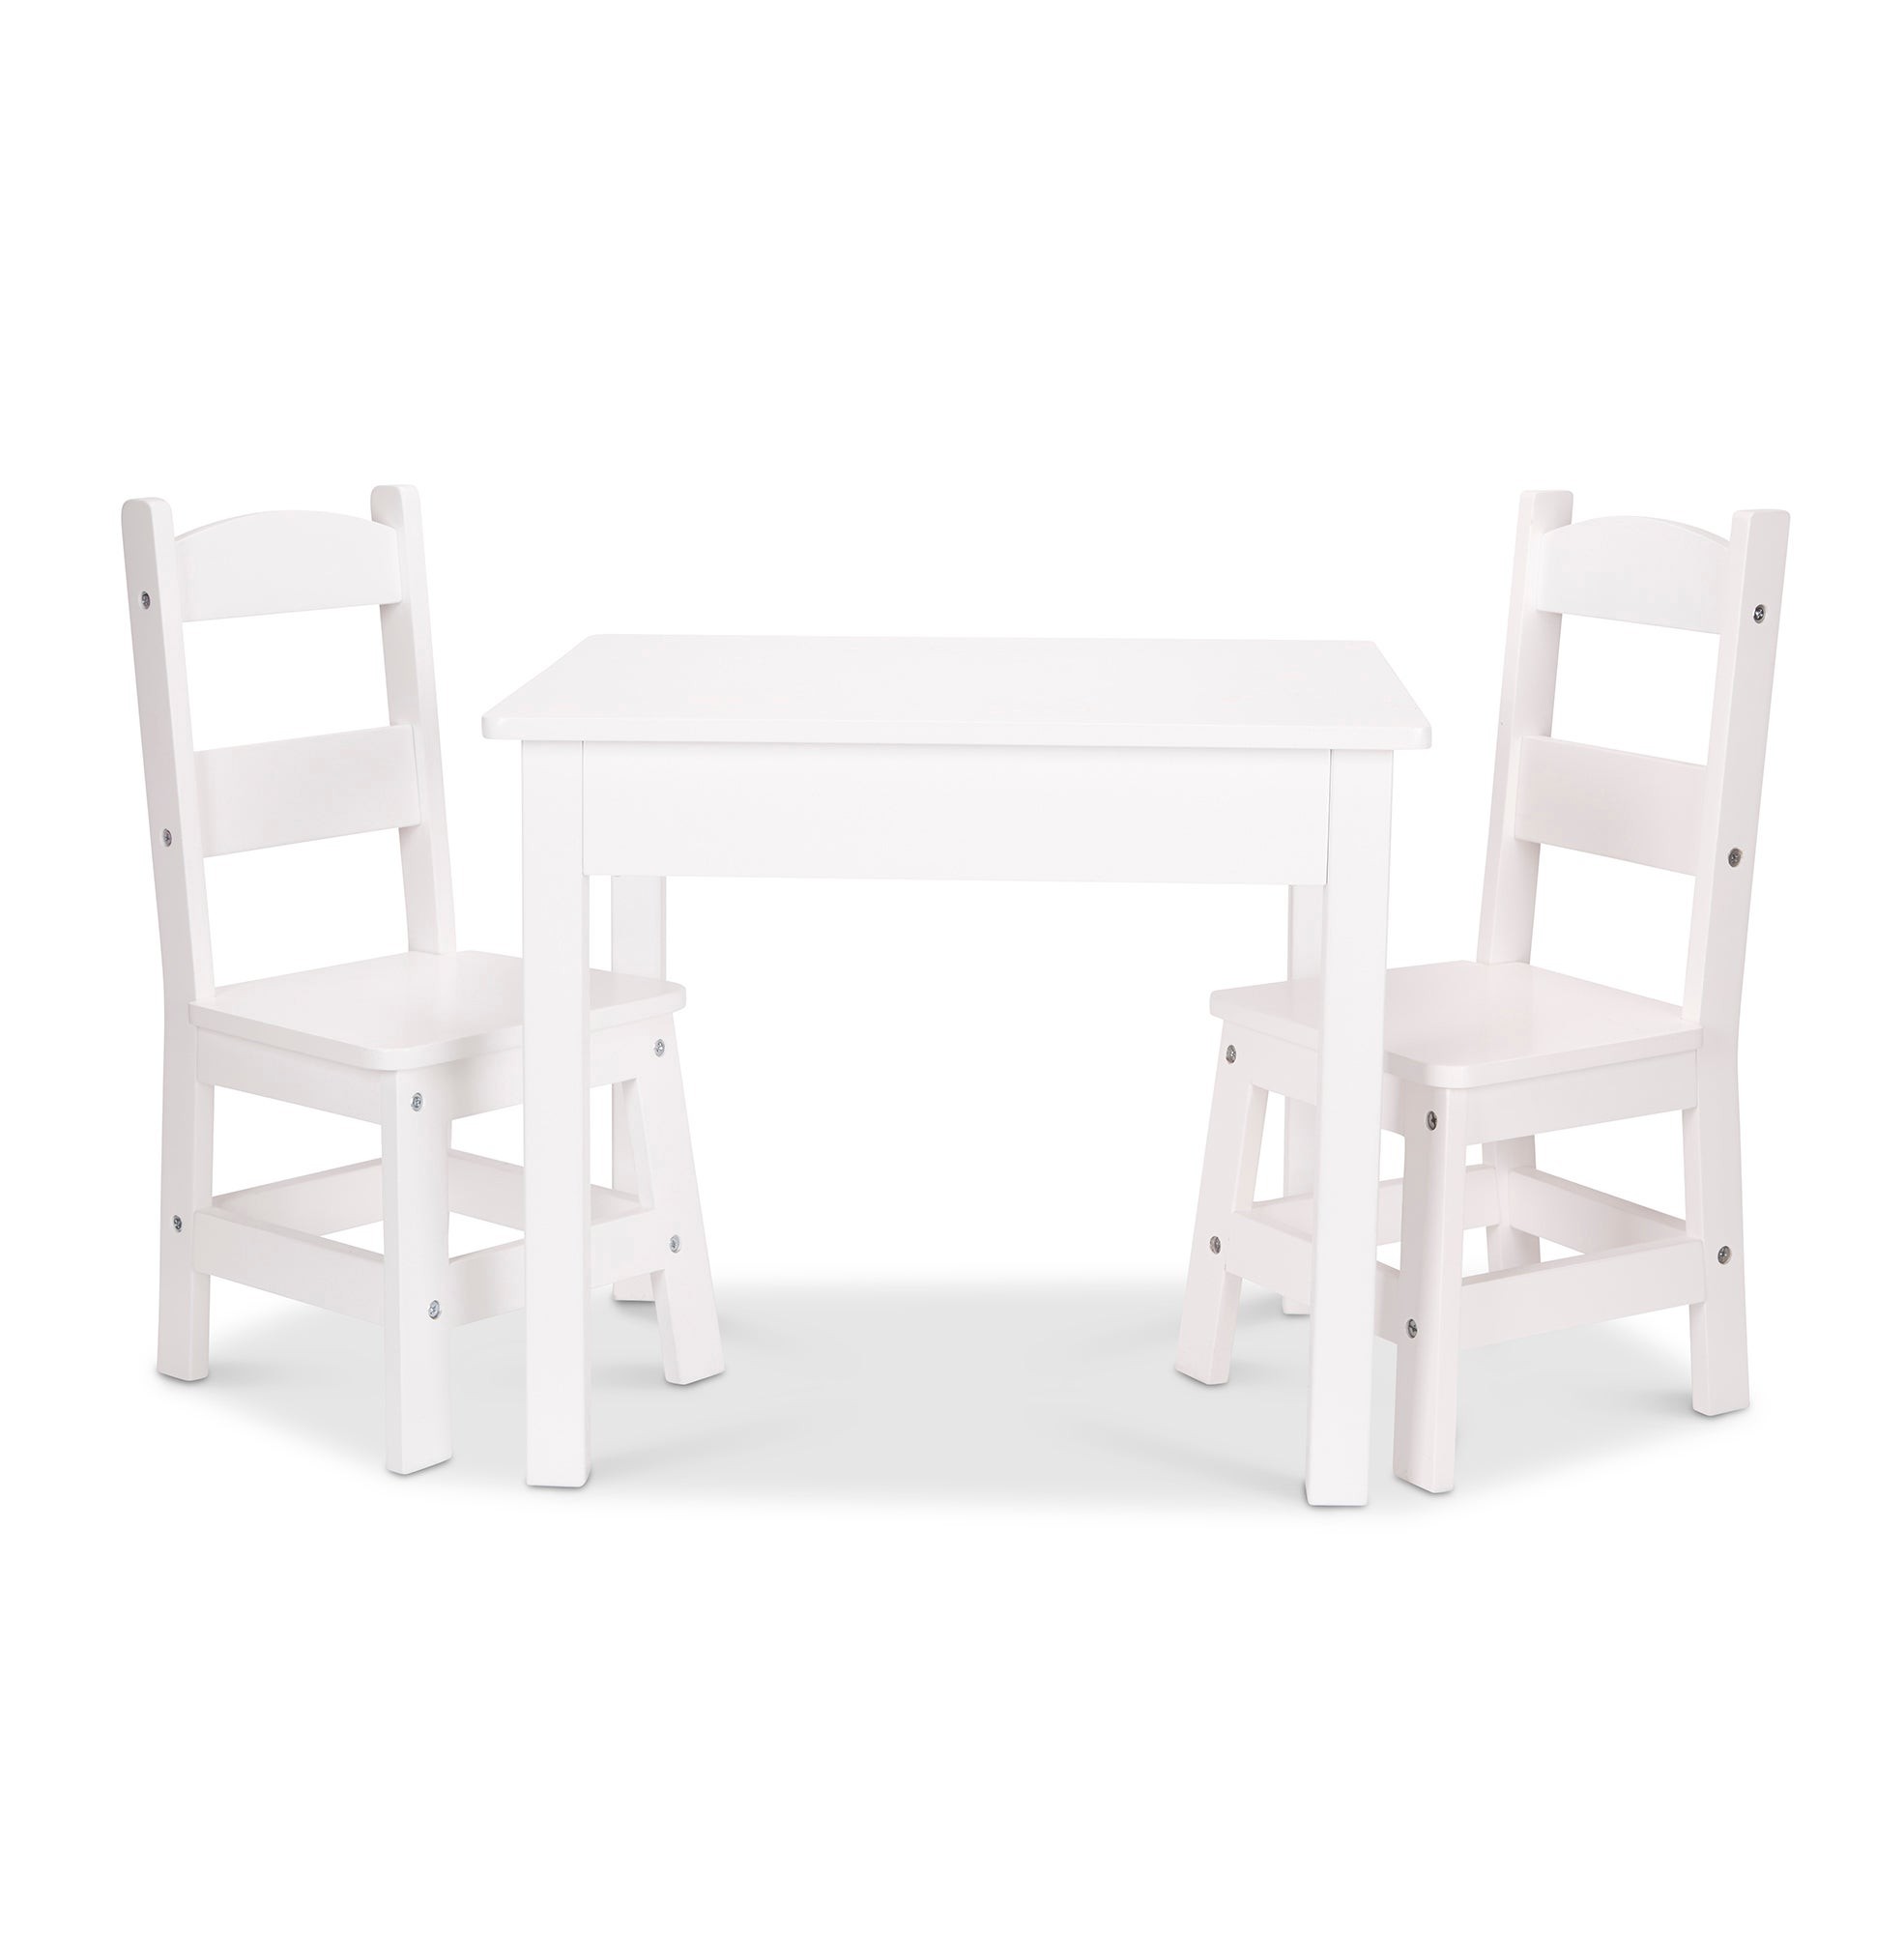 3pc Wooden Table & Chairs Set White - Ages 3-6 Years